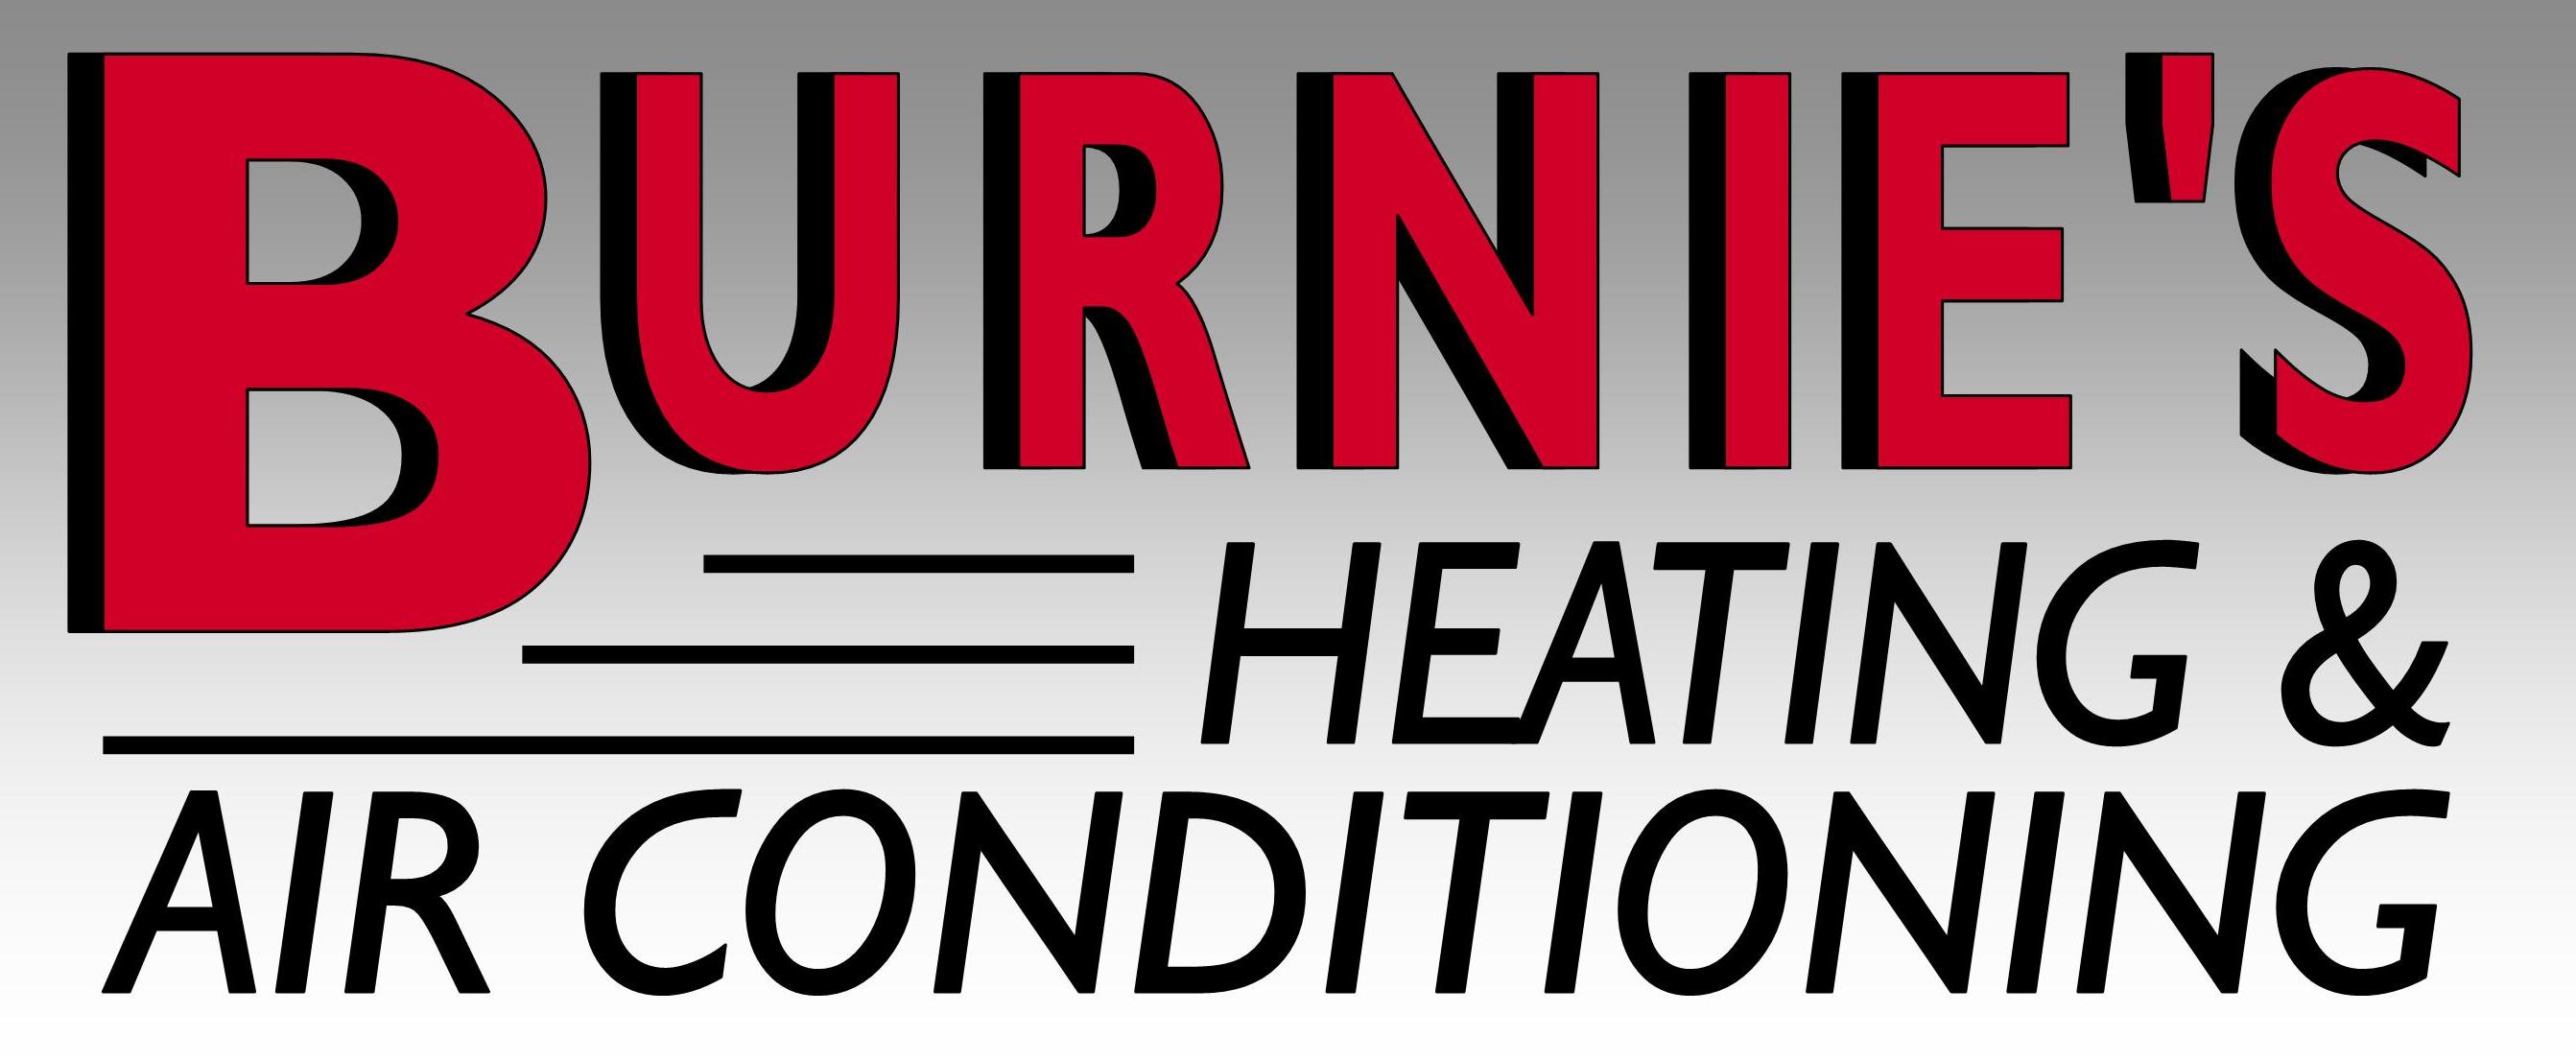 Burnie's Heating & Air Conditioning